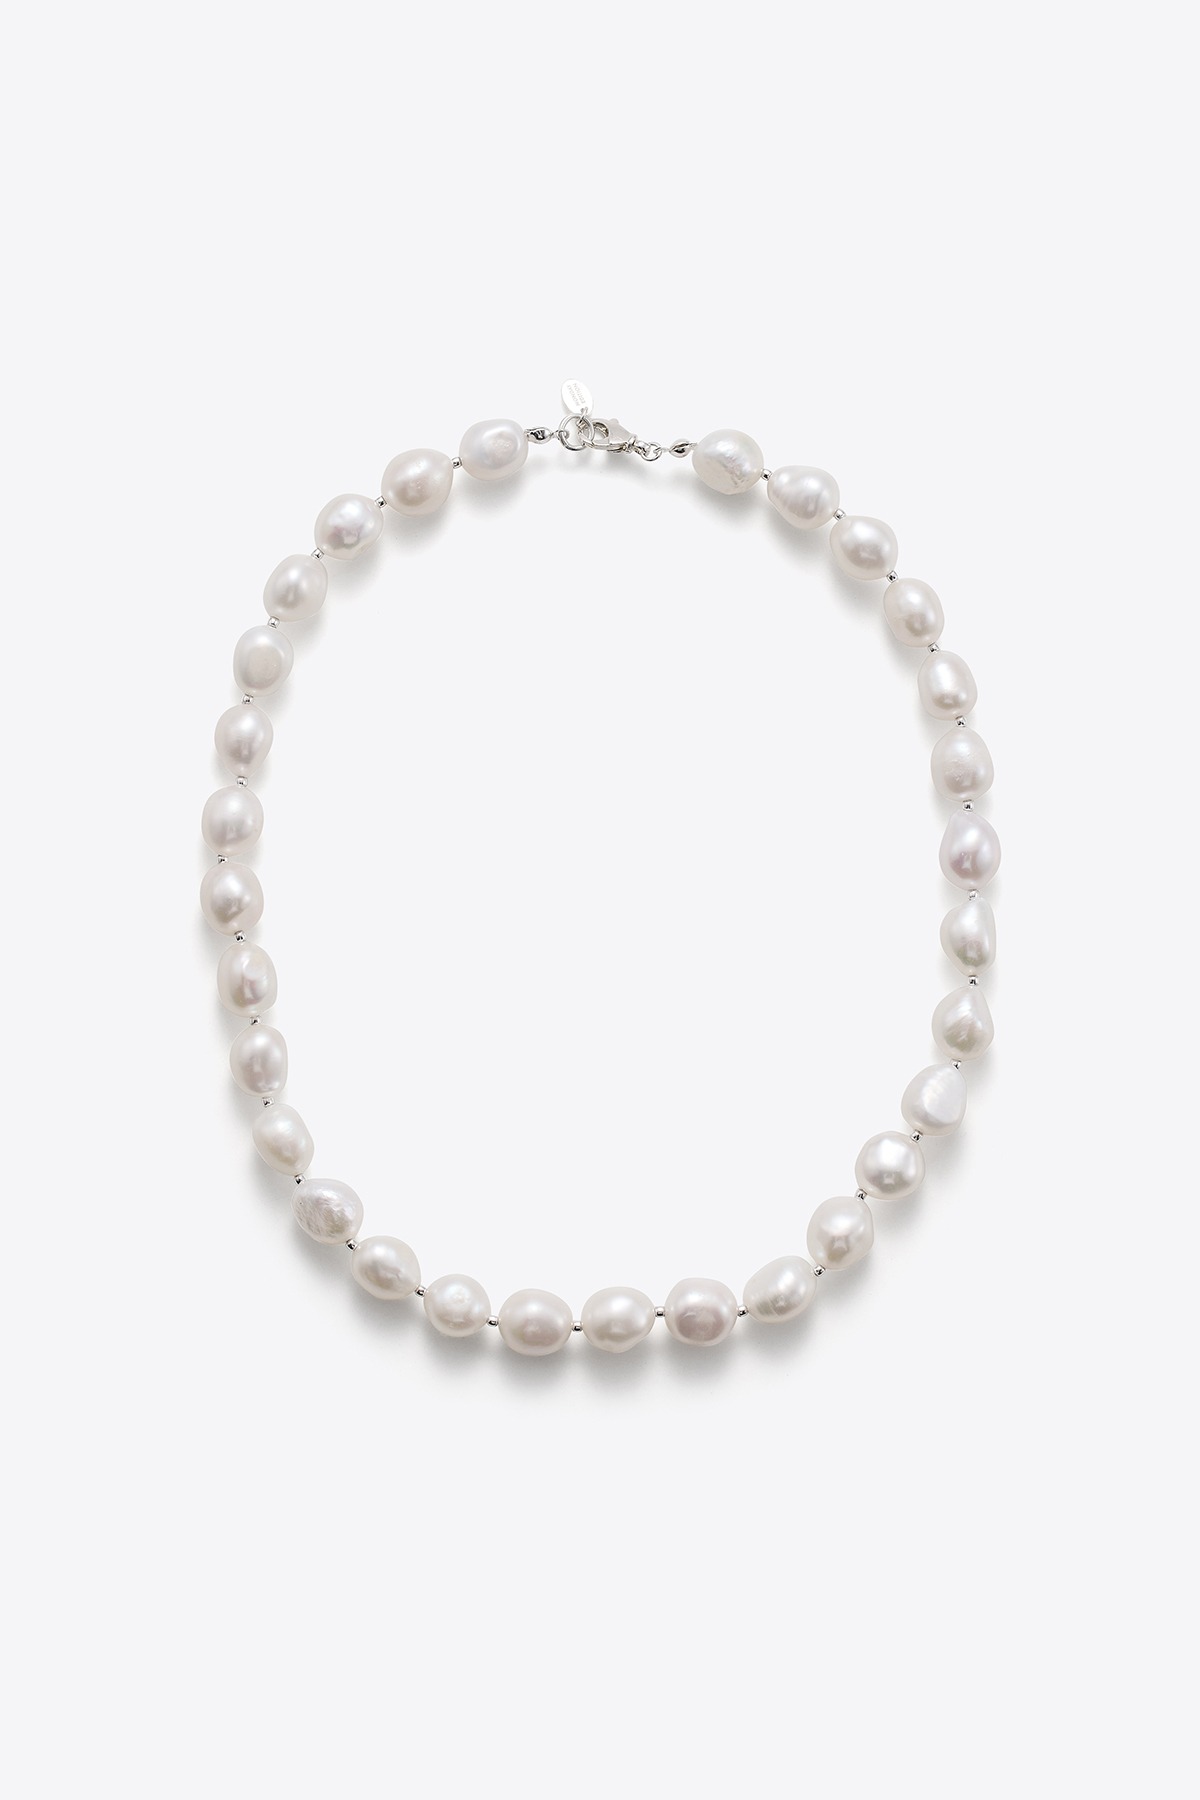 The Baroque Pearl and Silver Ball Necklace